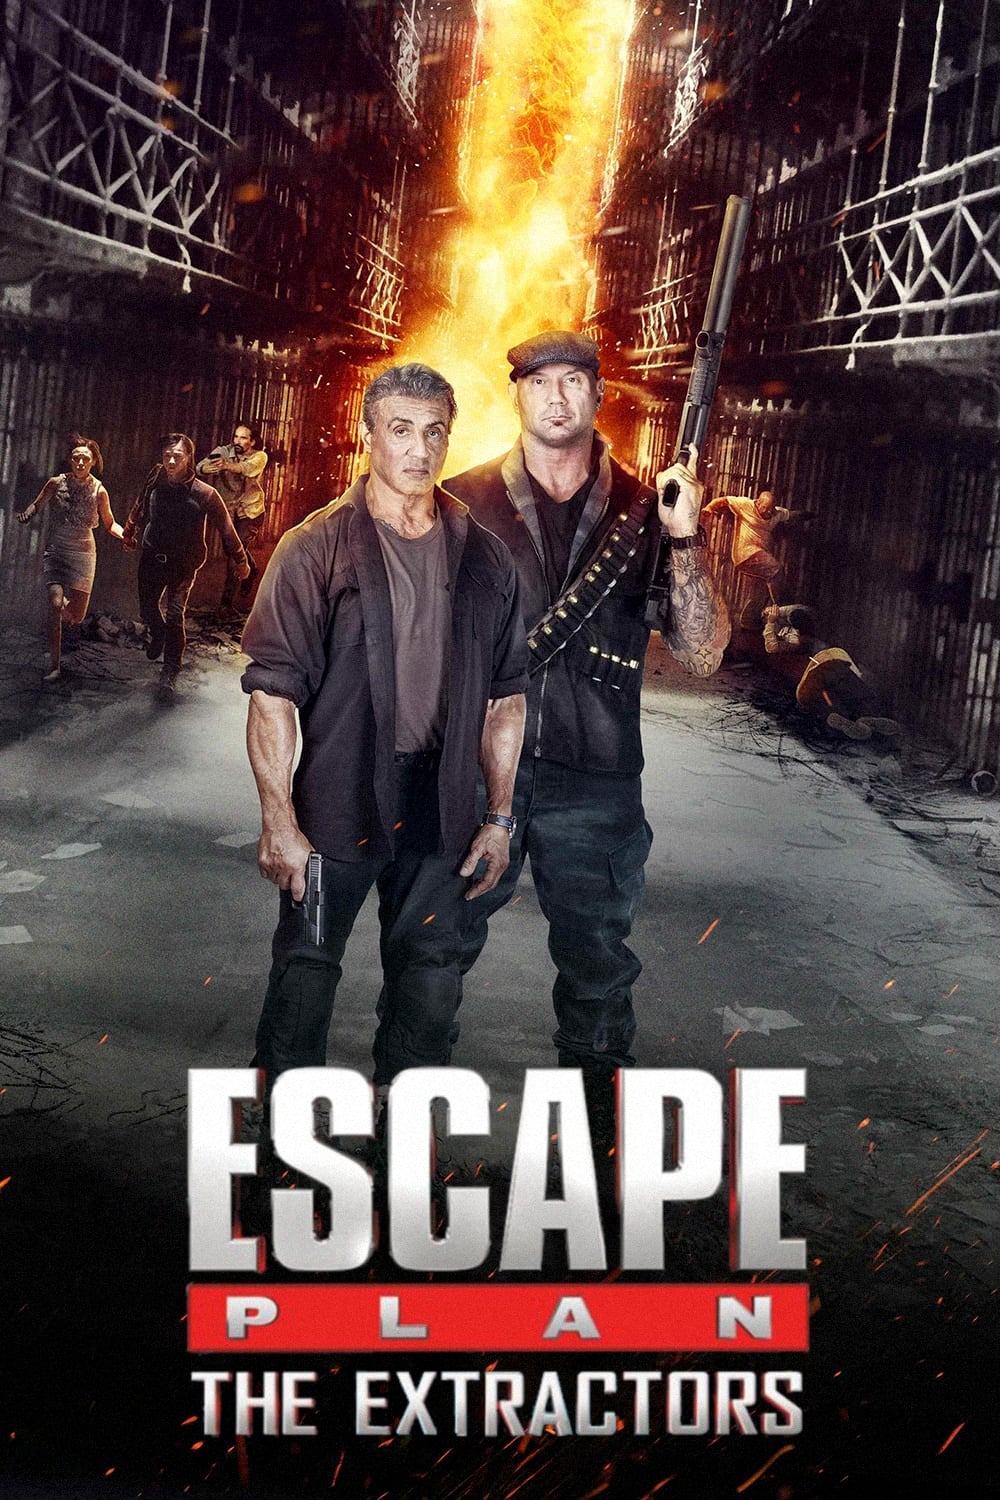 Escape Plan: The Extractors (2019) UNRATED PLACEBO Full HD 1080p Latino